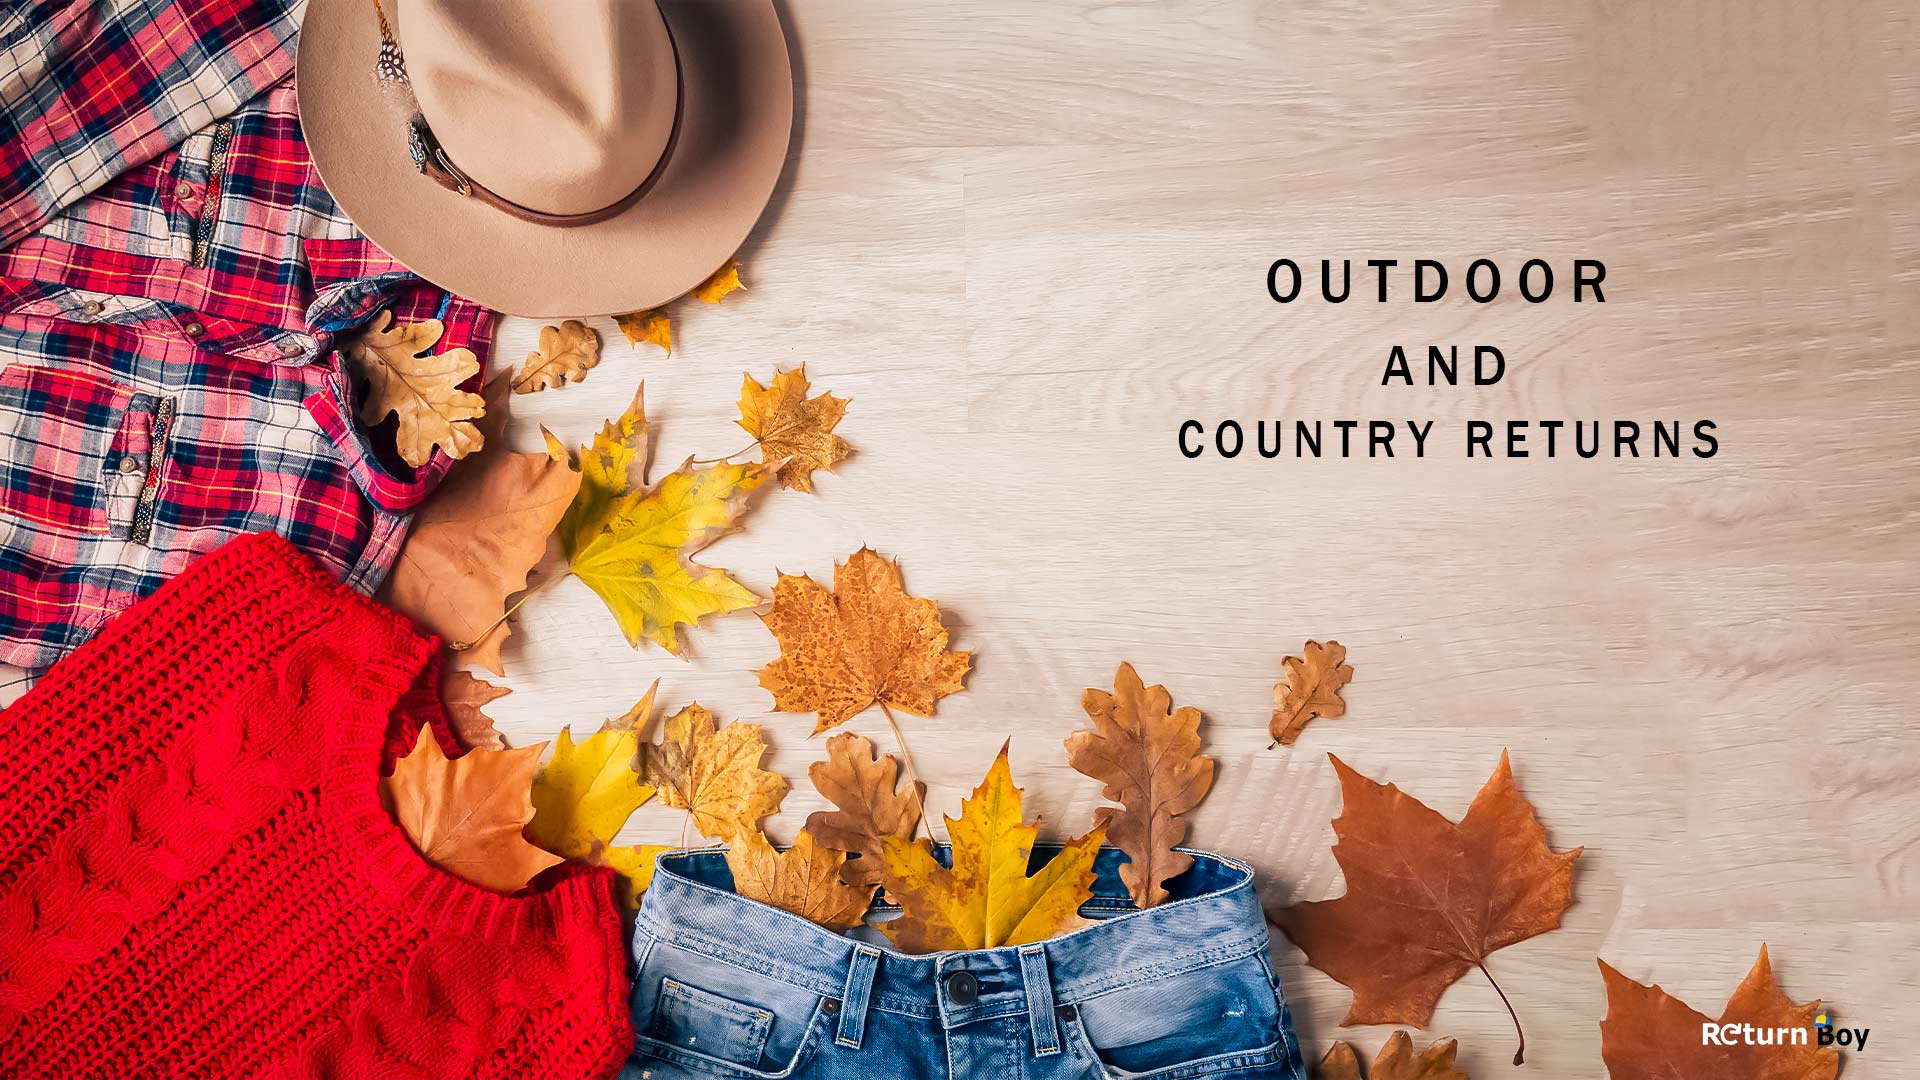 Outdoor and Country Return Policy